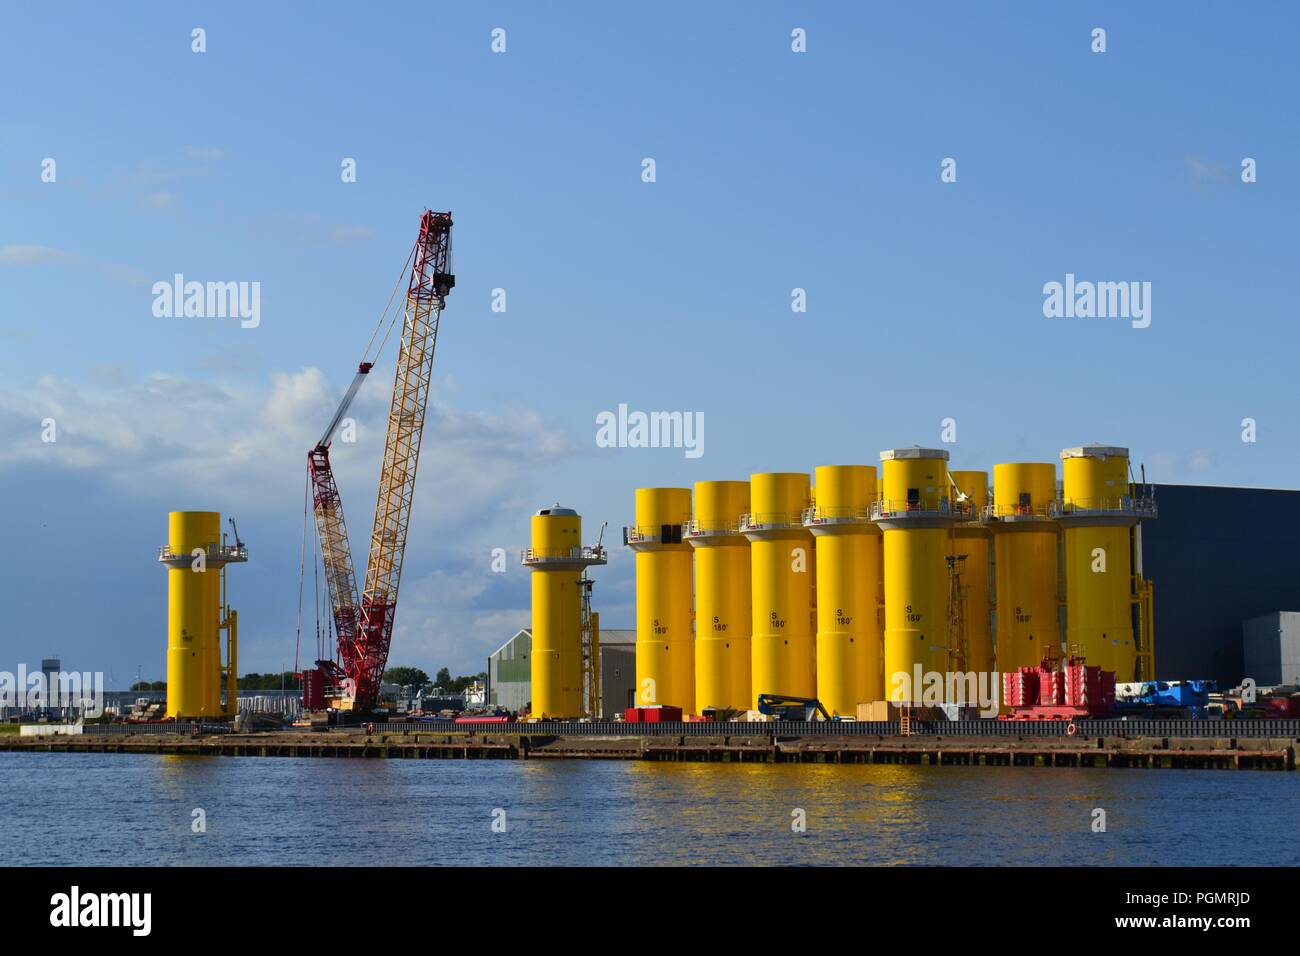 Colourful, naturally lit image of offshore wind farm parts being built/stored at Wilton Group, Middlesbrough, Teesside, UK. Stock Photo